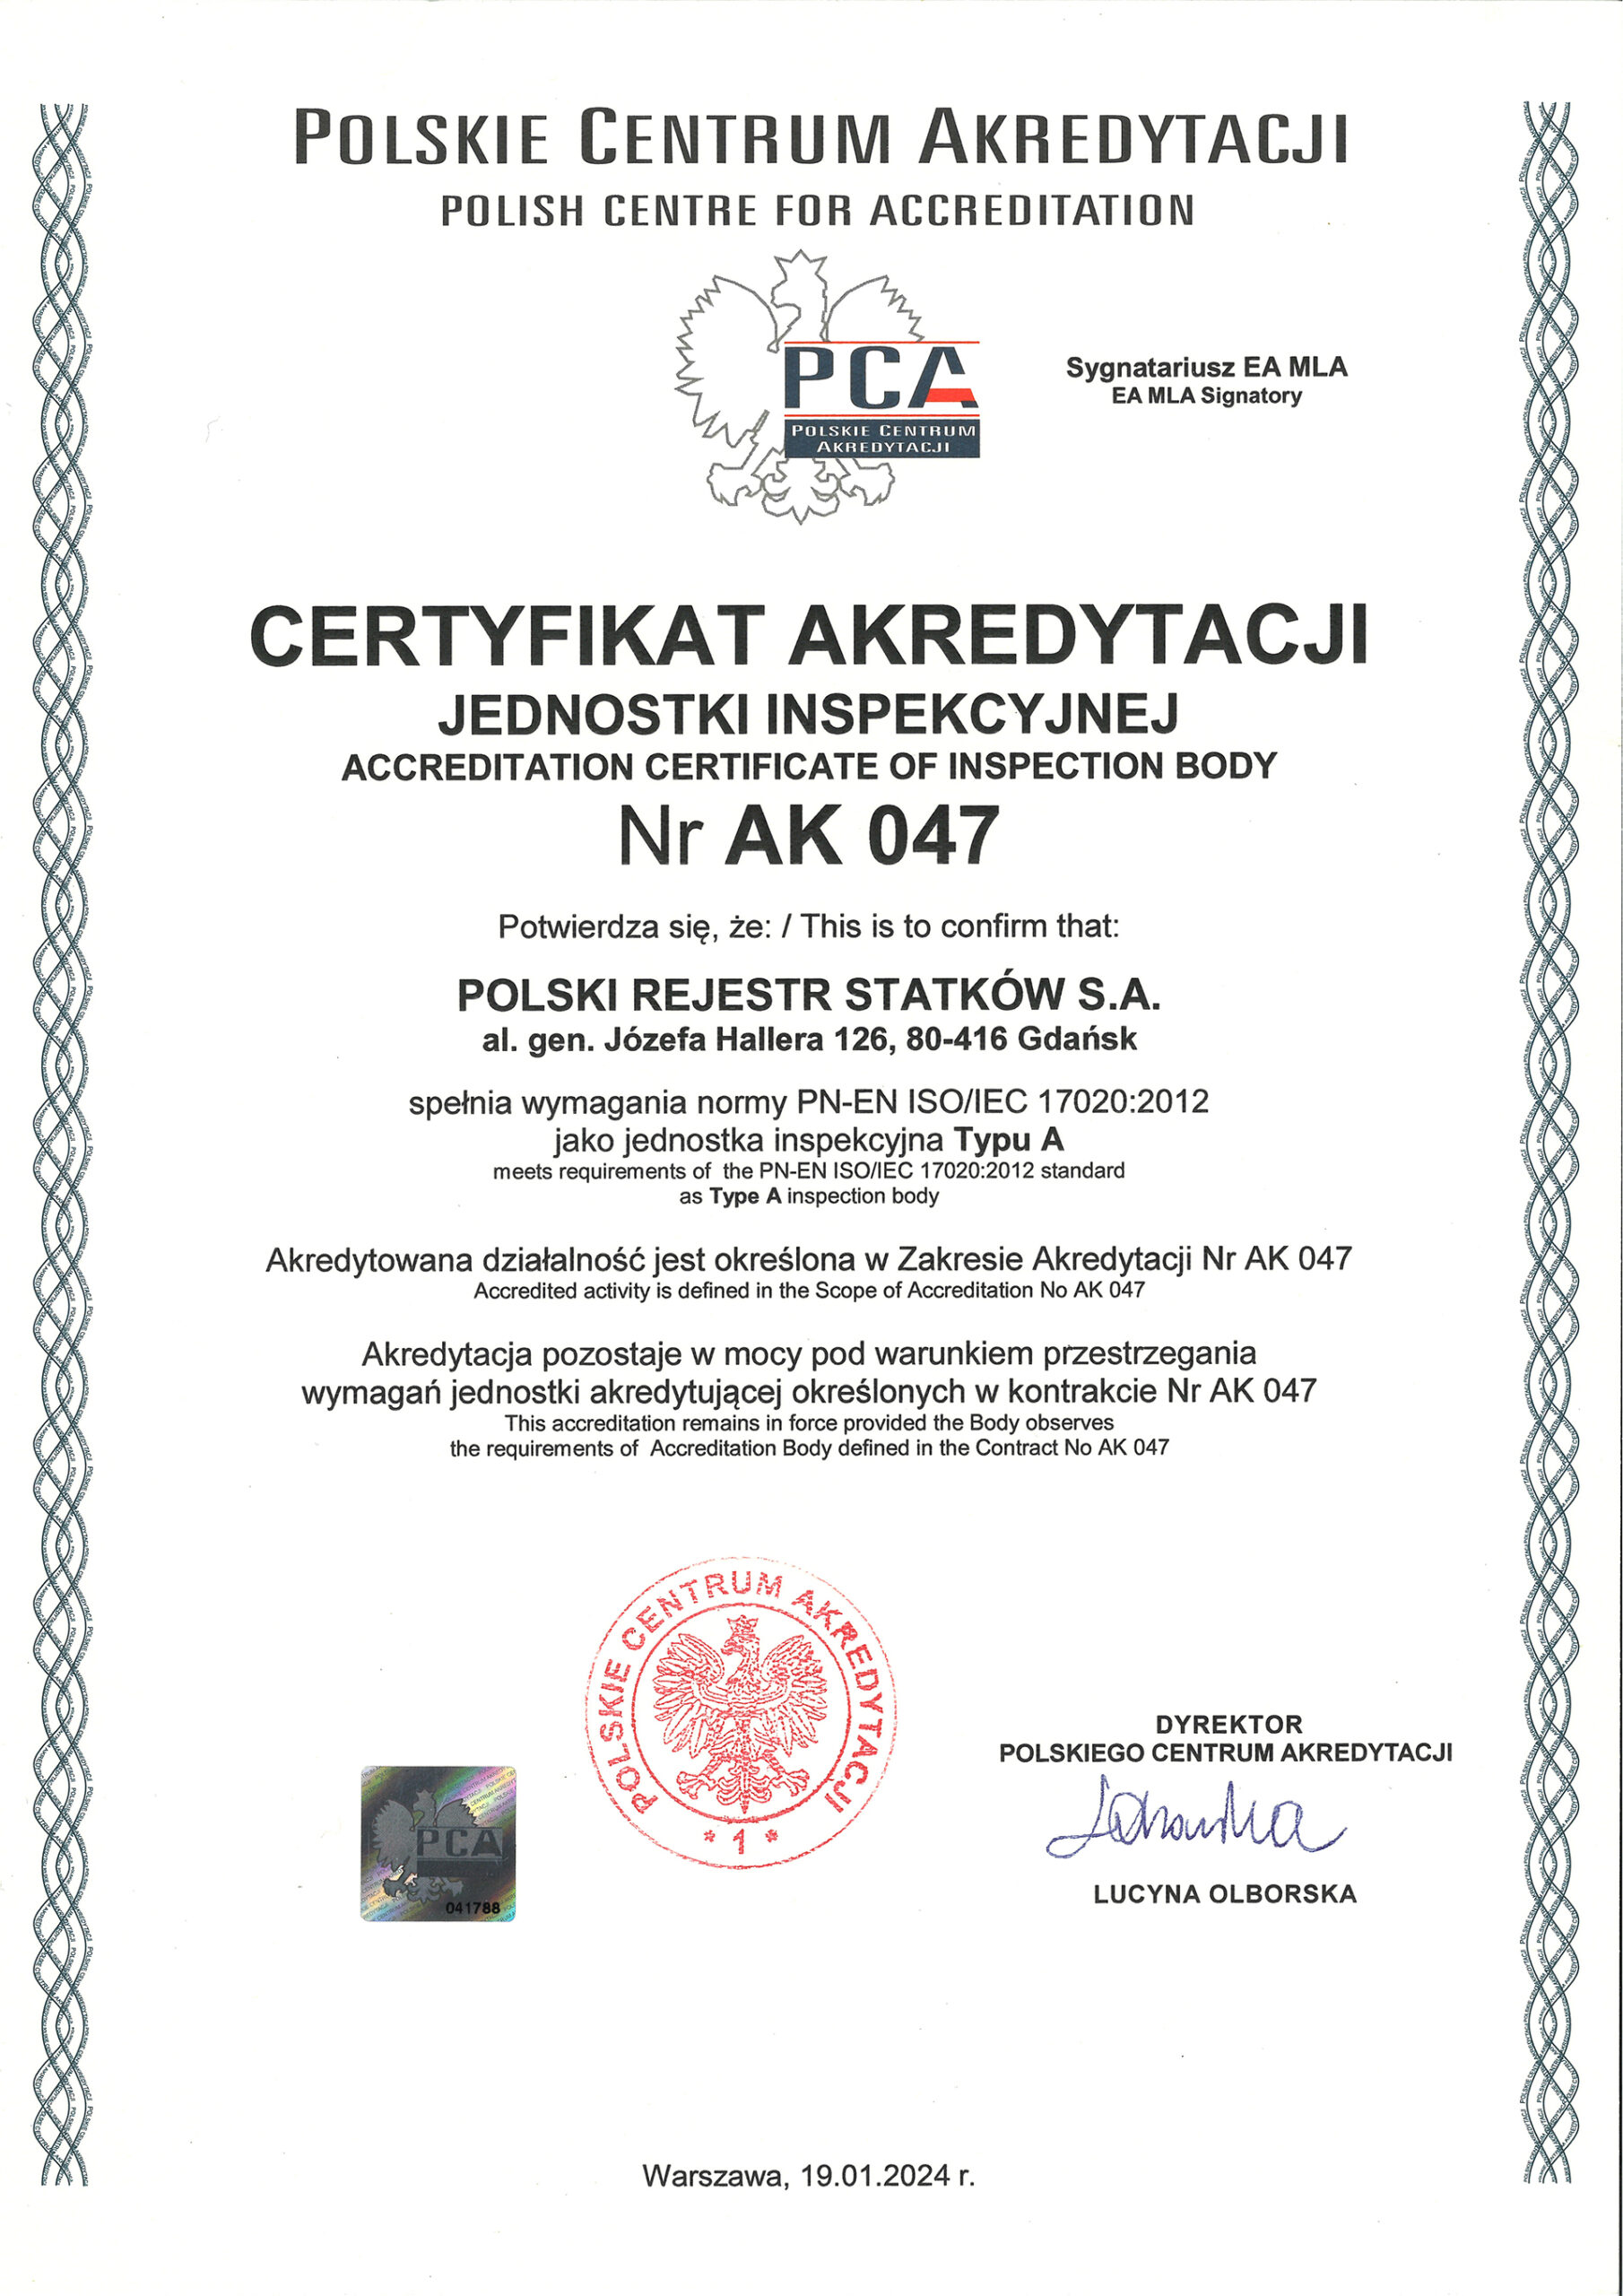 PRS with a certificate of inspection unit type A